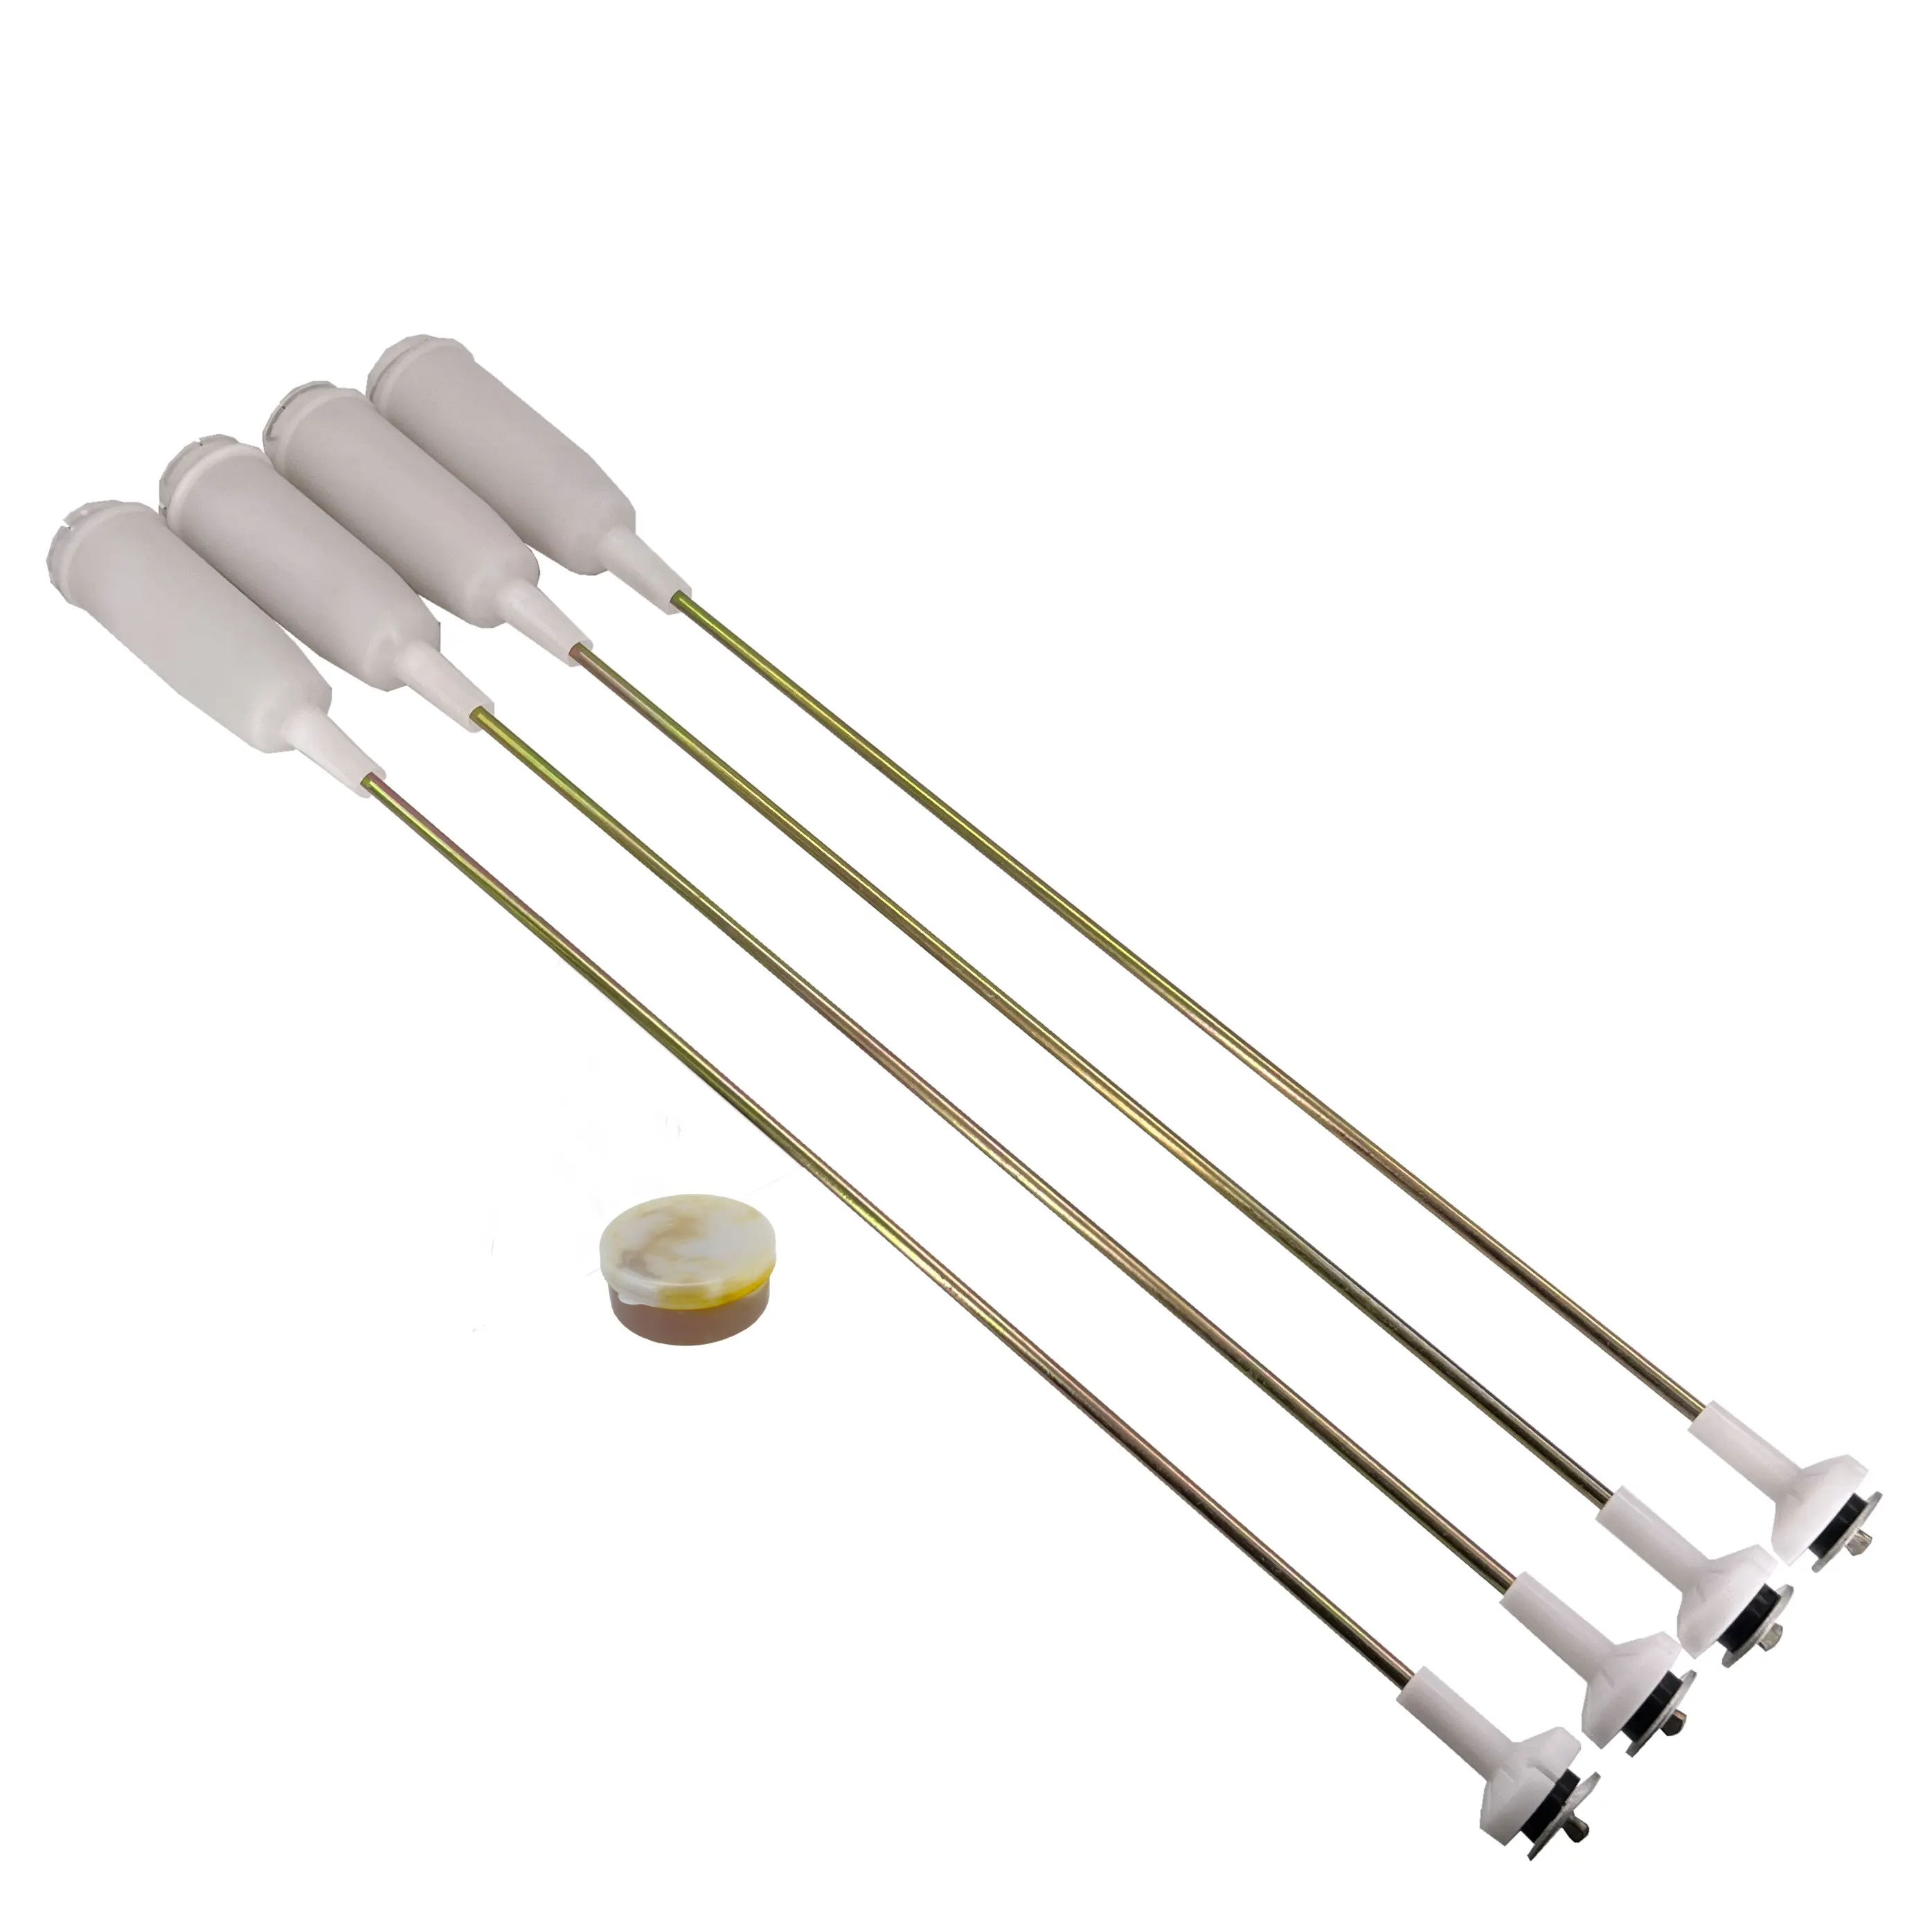 High quality White Color Washing Machine Replacement Parts Washer Suspension Rods Kit AJK72909308